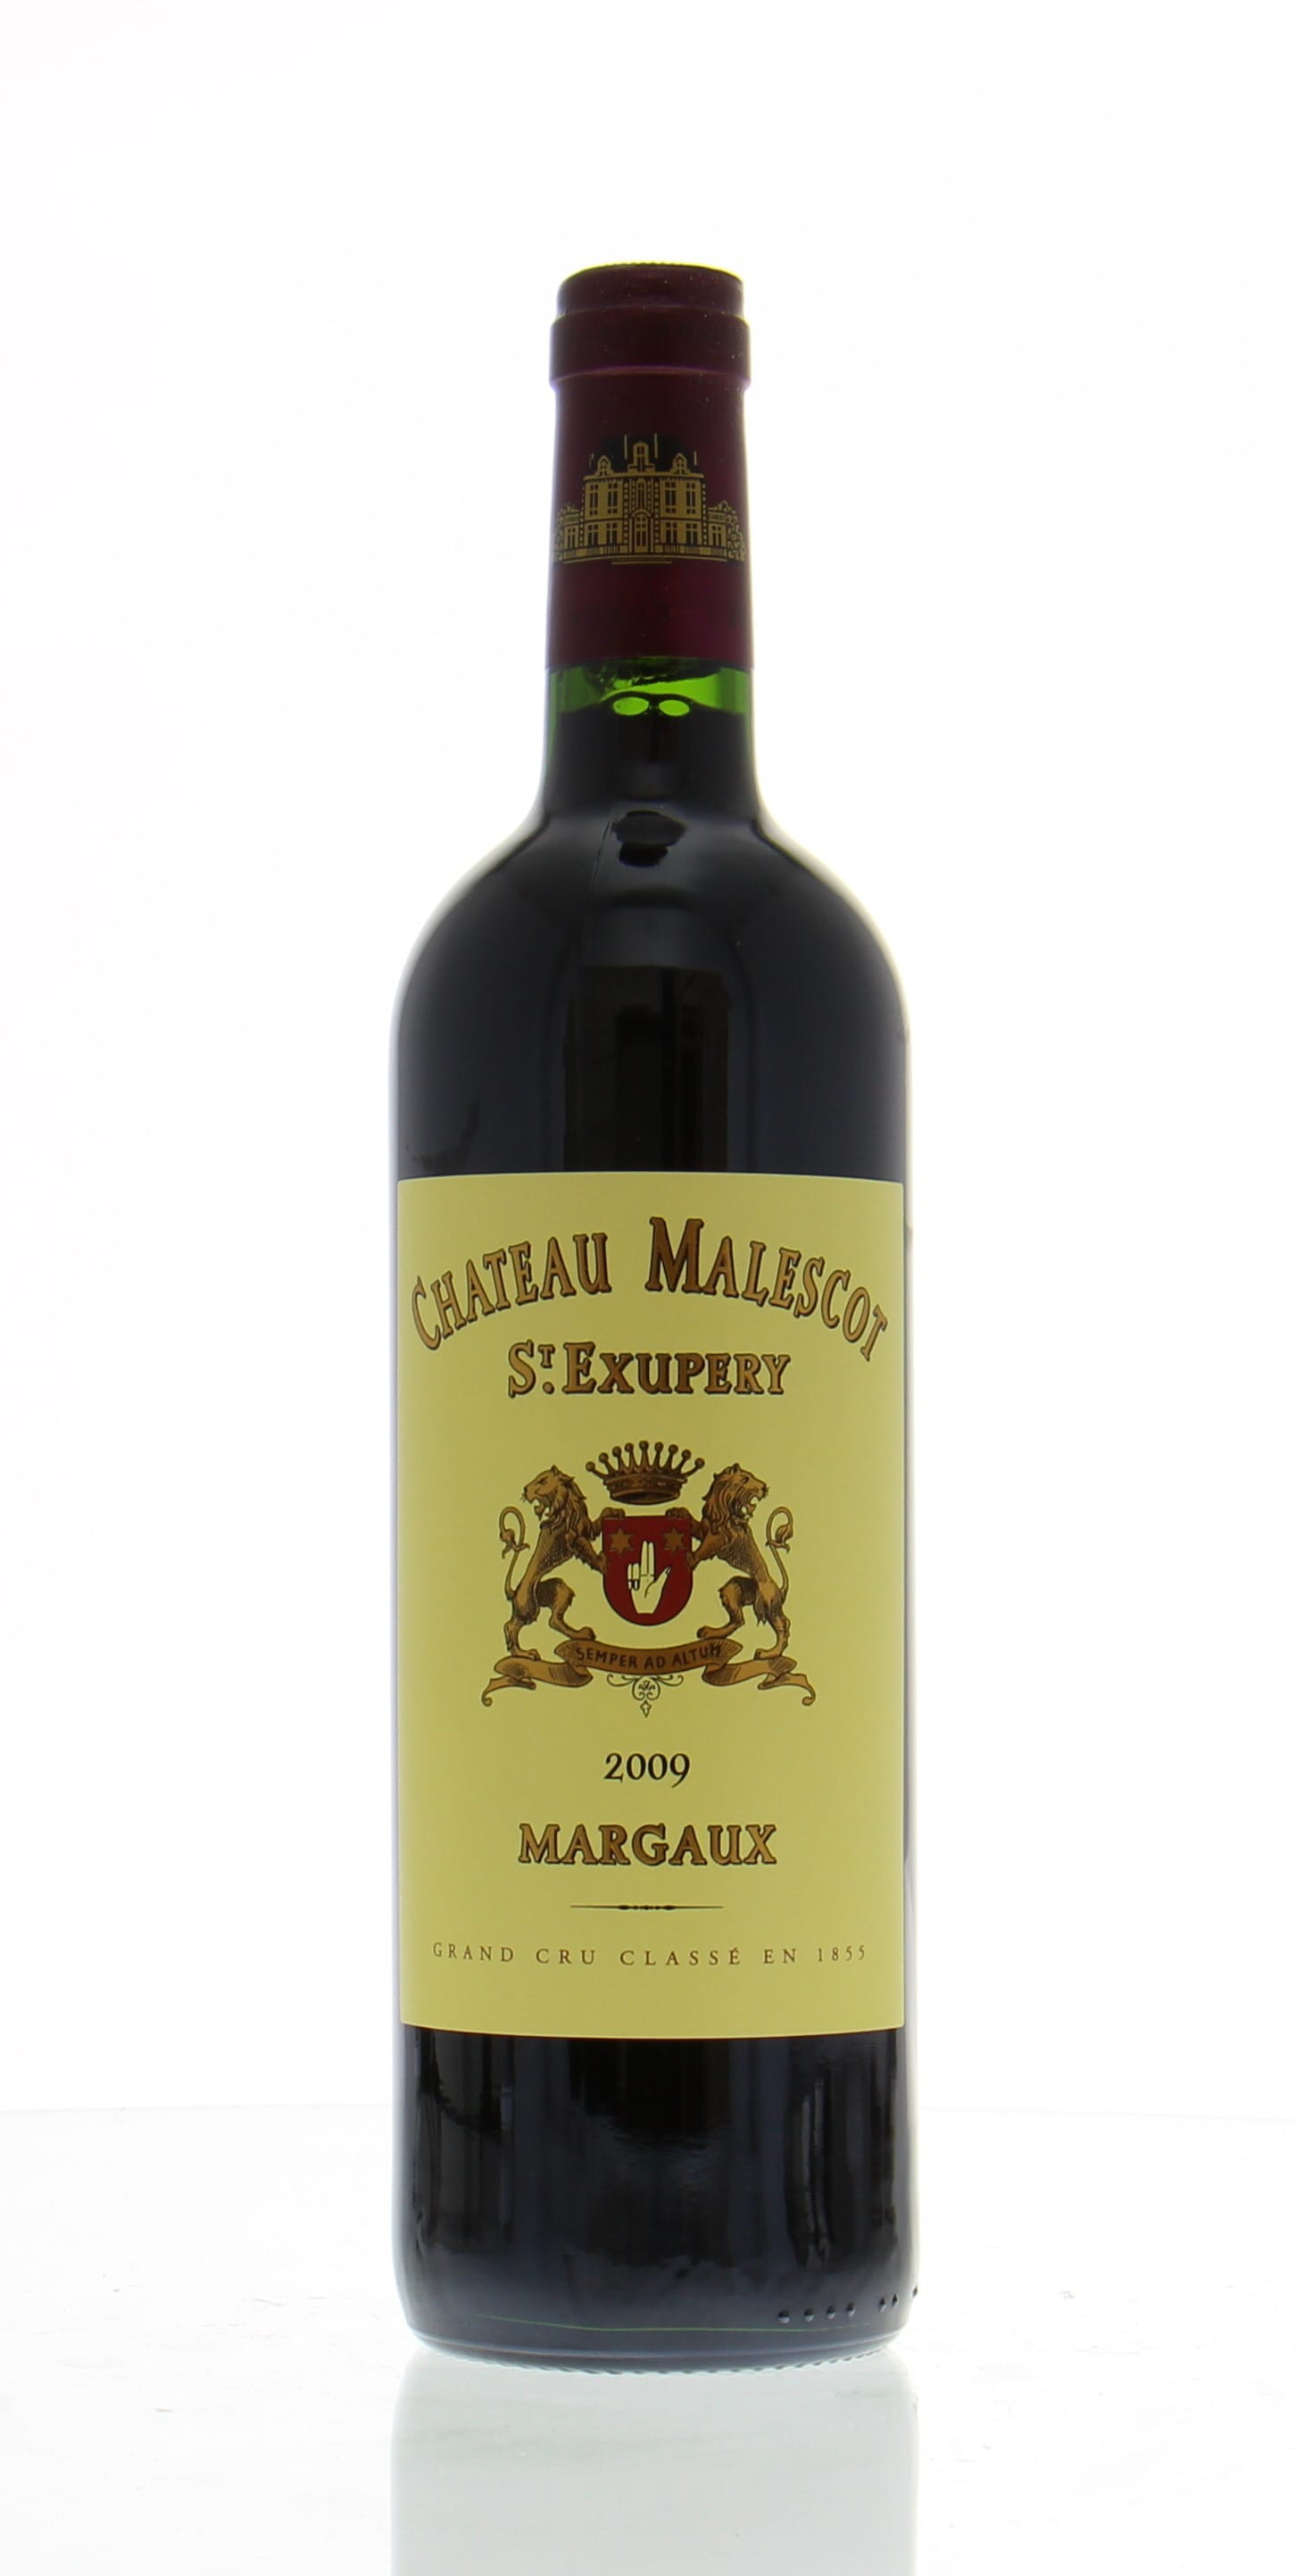 Chateau Malescot-St-Exupery - Chateau Malescot-St-Exupery 2009 Perfect